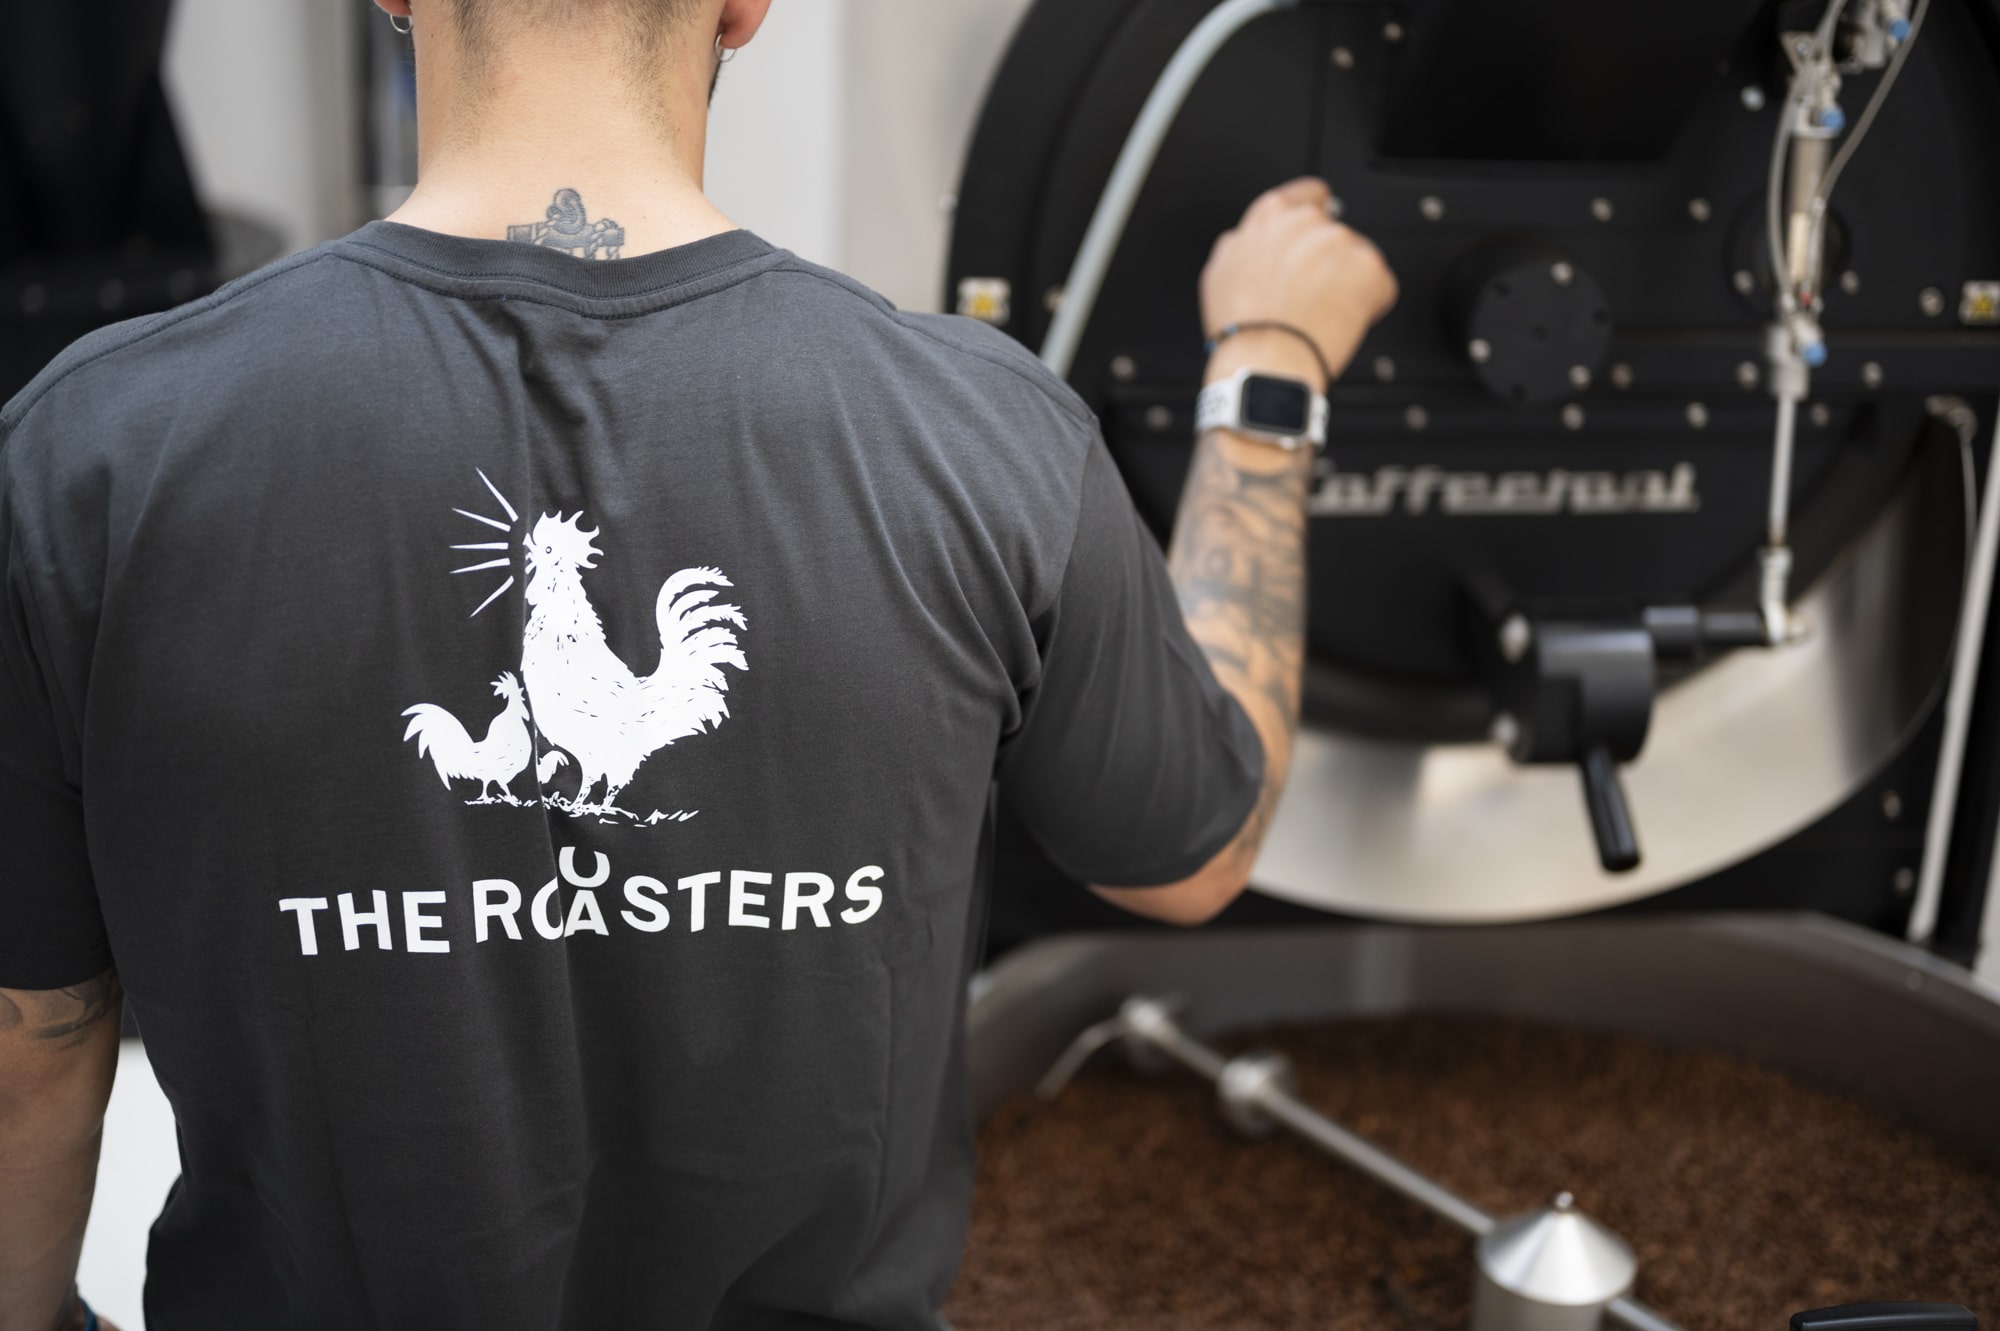 Specialty coffee στην Αθήνα με την υπογραφή The Roosters